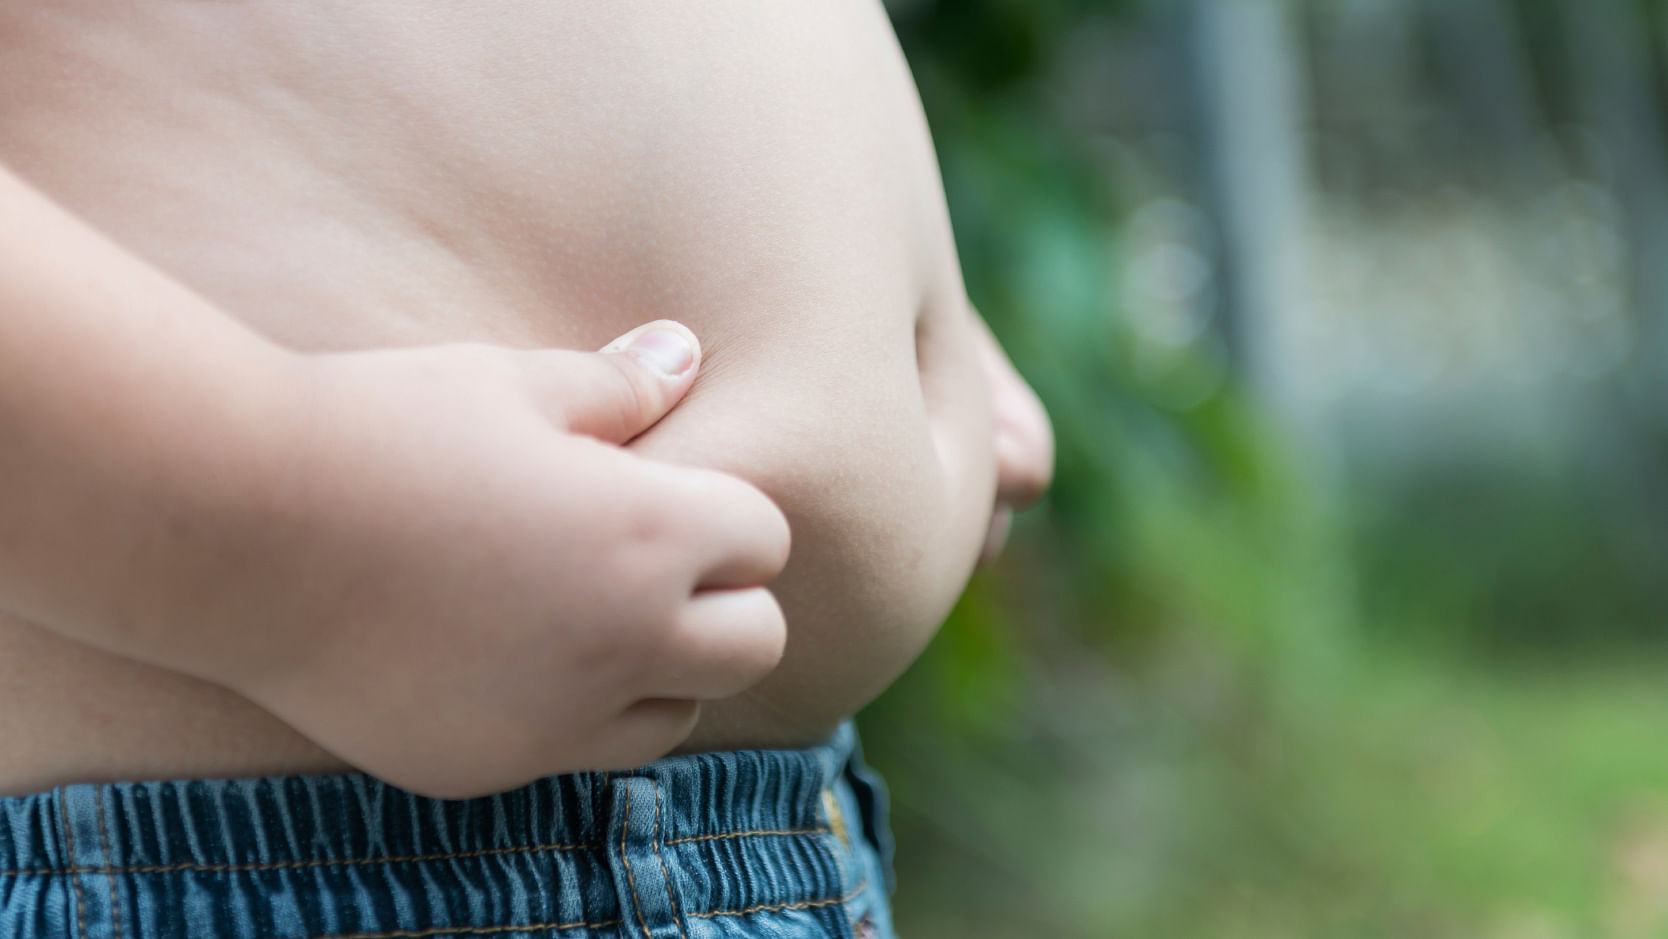 India is fighting a losing battle with the bulge, hosting as it does the third-most number of obese people in the world, 61 million and growing. (Photo: iStockphoto)